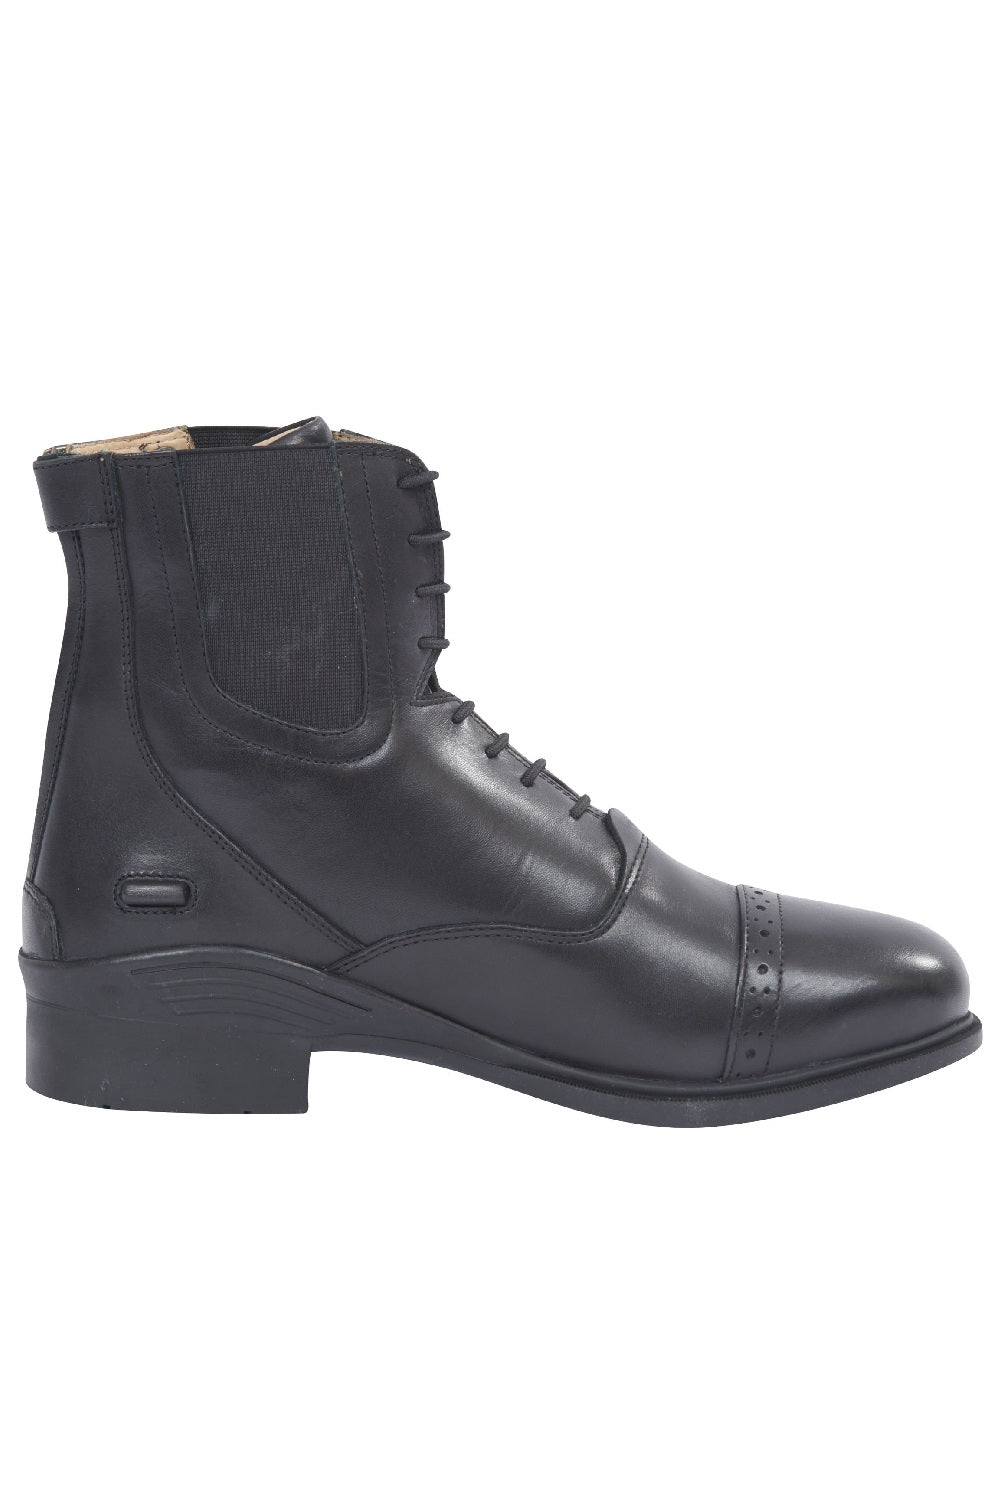 Dublin Evolution Lace Front Paddock Boots in Black 